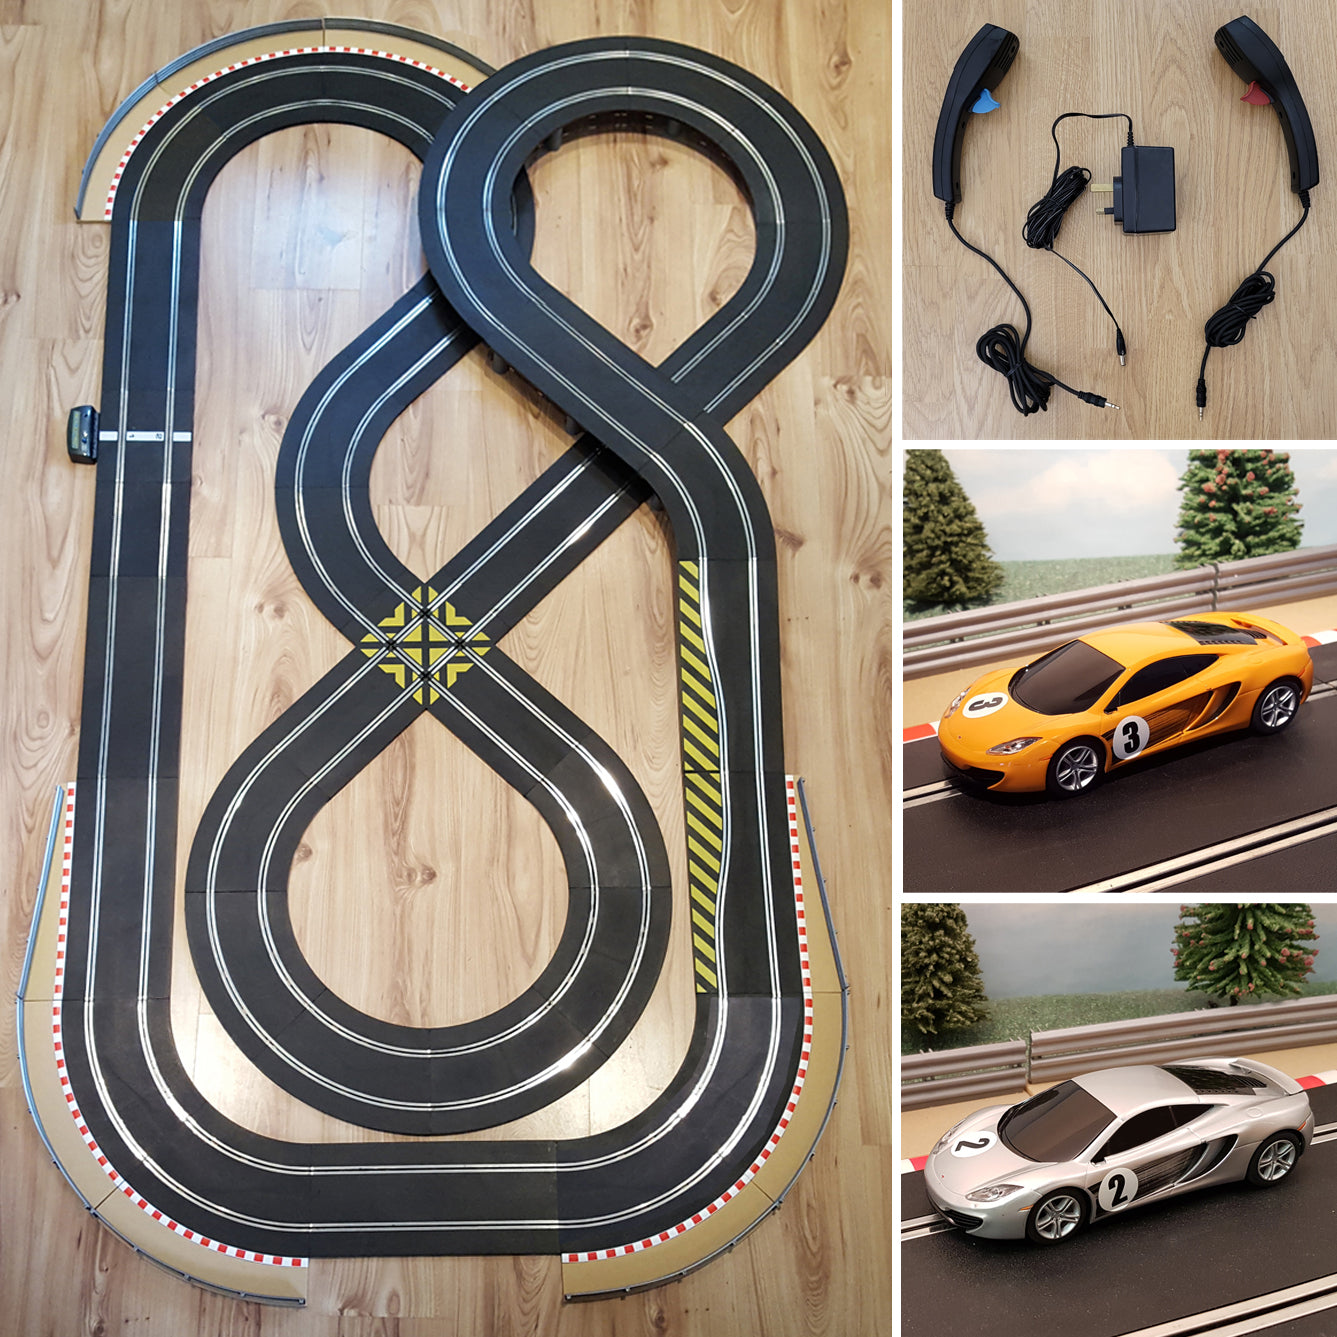 Scalextric Sport 1:32 Figure-Of-Eight Layout Set With McLaren Cars